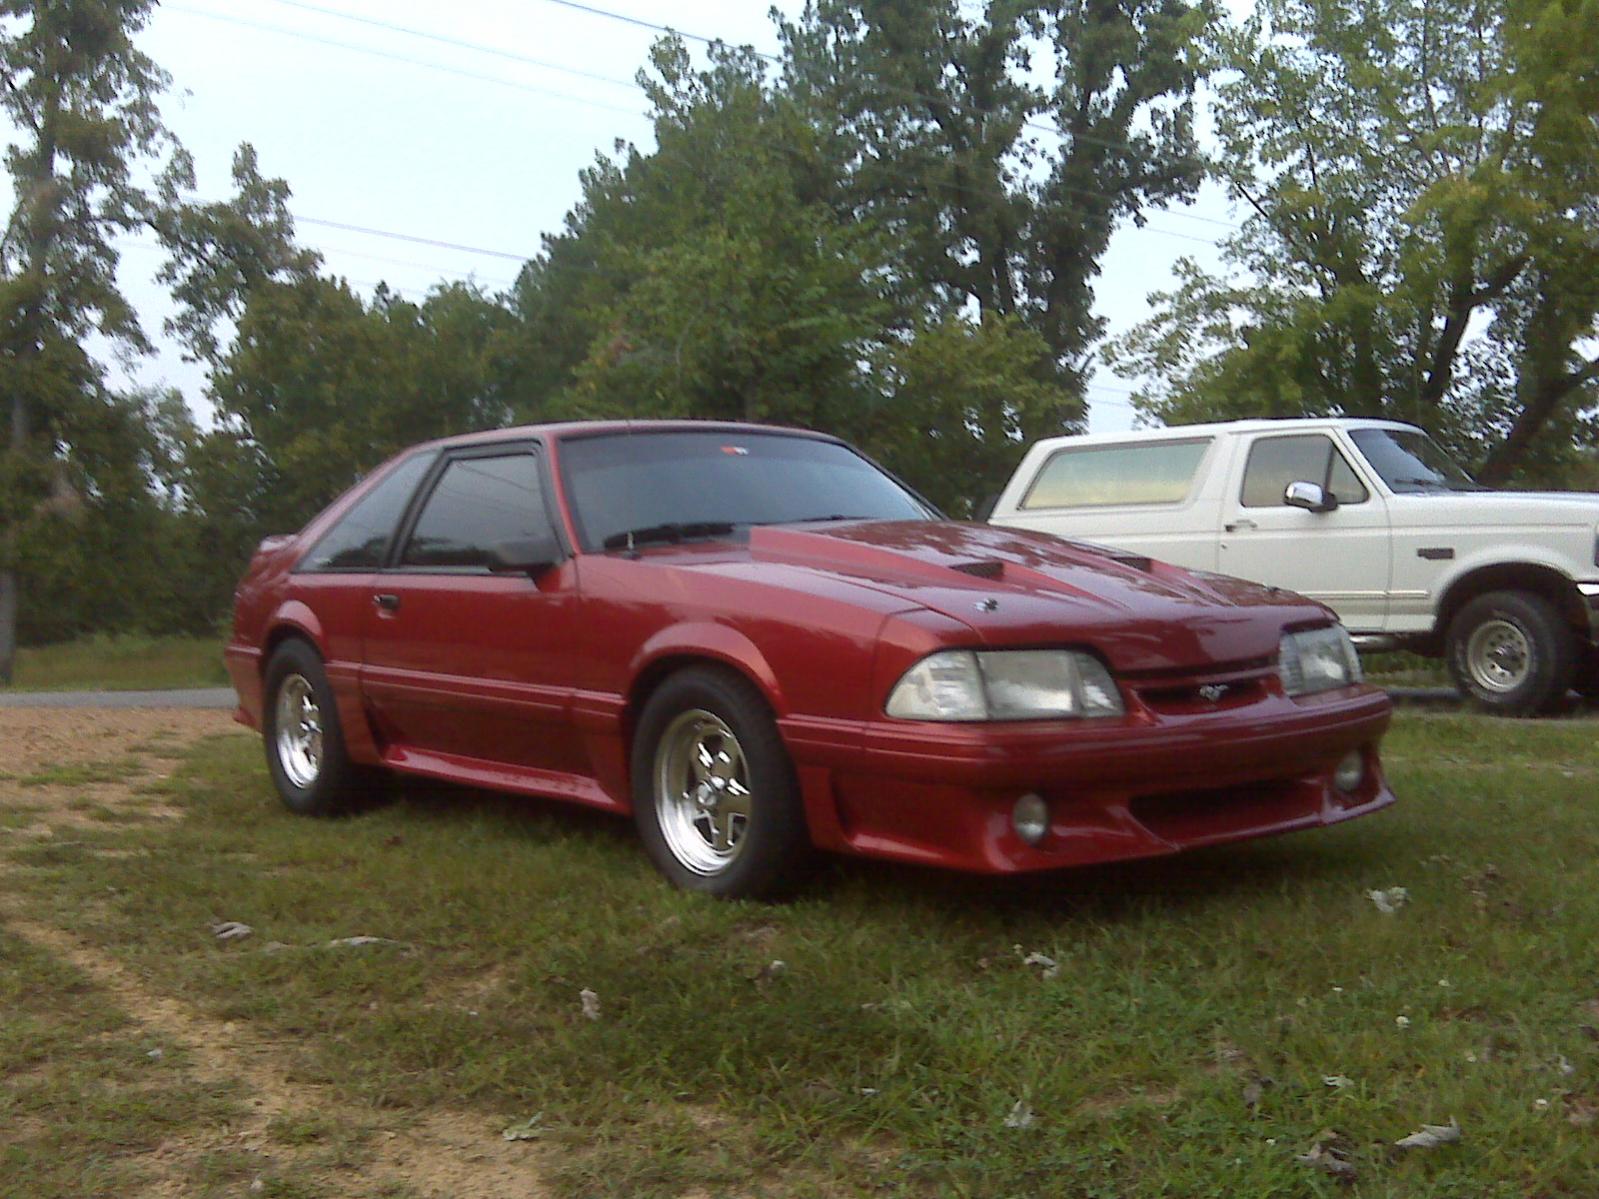 88 Mustang GT hatchback 5.0 5 speed with mods - LS1TECH - Camaro and